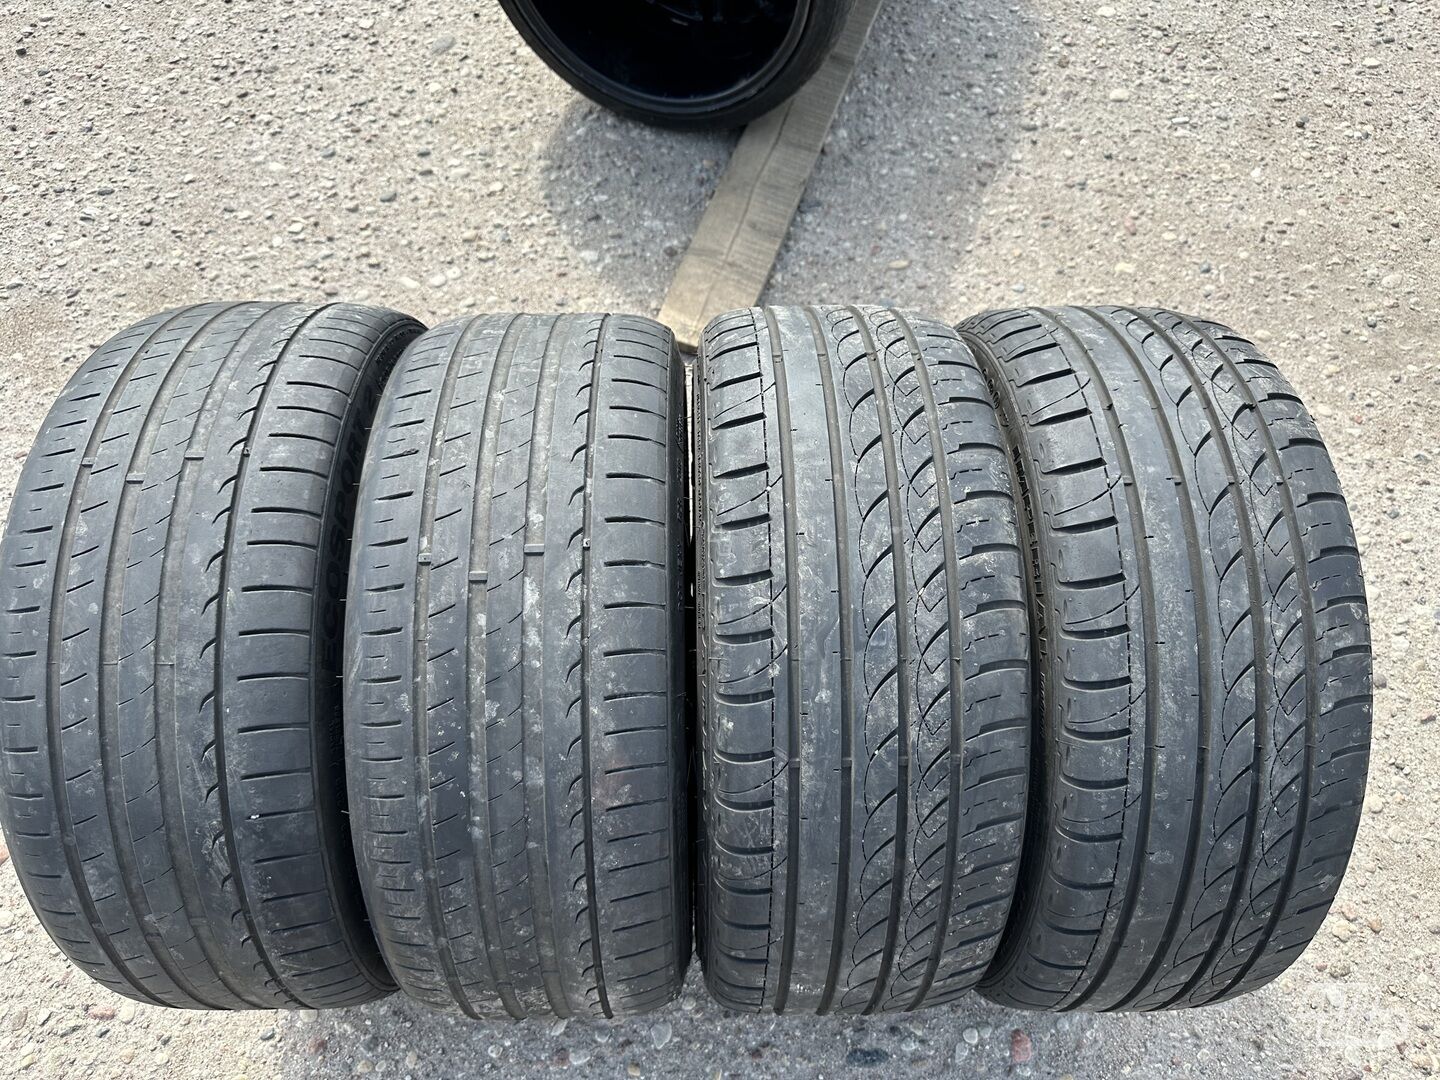 Imperial Siunciam 4+7mm R19 summer tyres passanger car